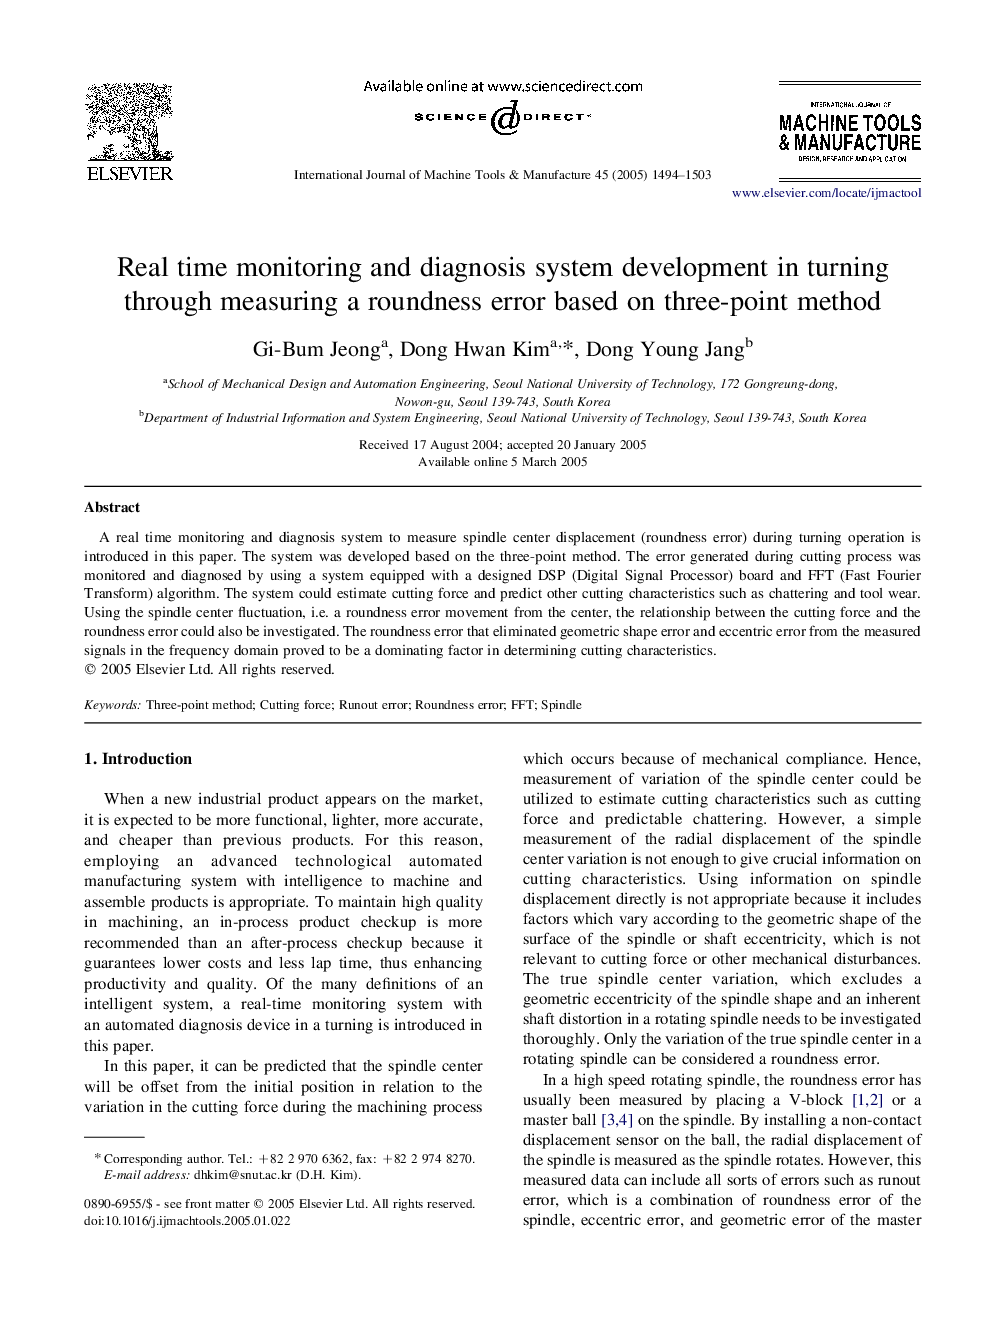 Real time monitoring and diagnosis system development in turning through measuring a roundness error based on three-point method